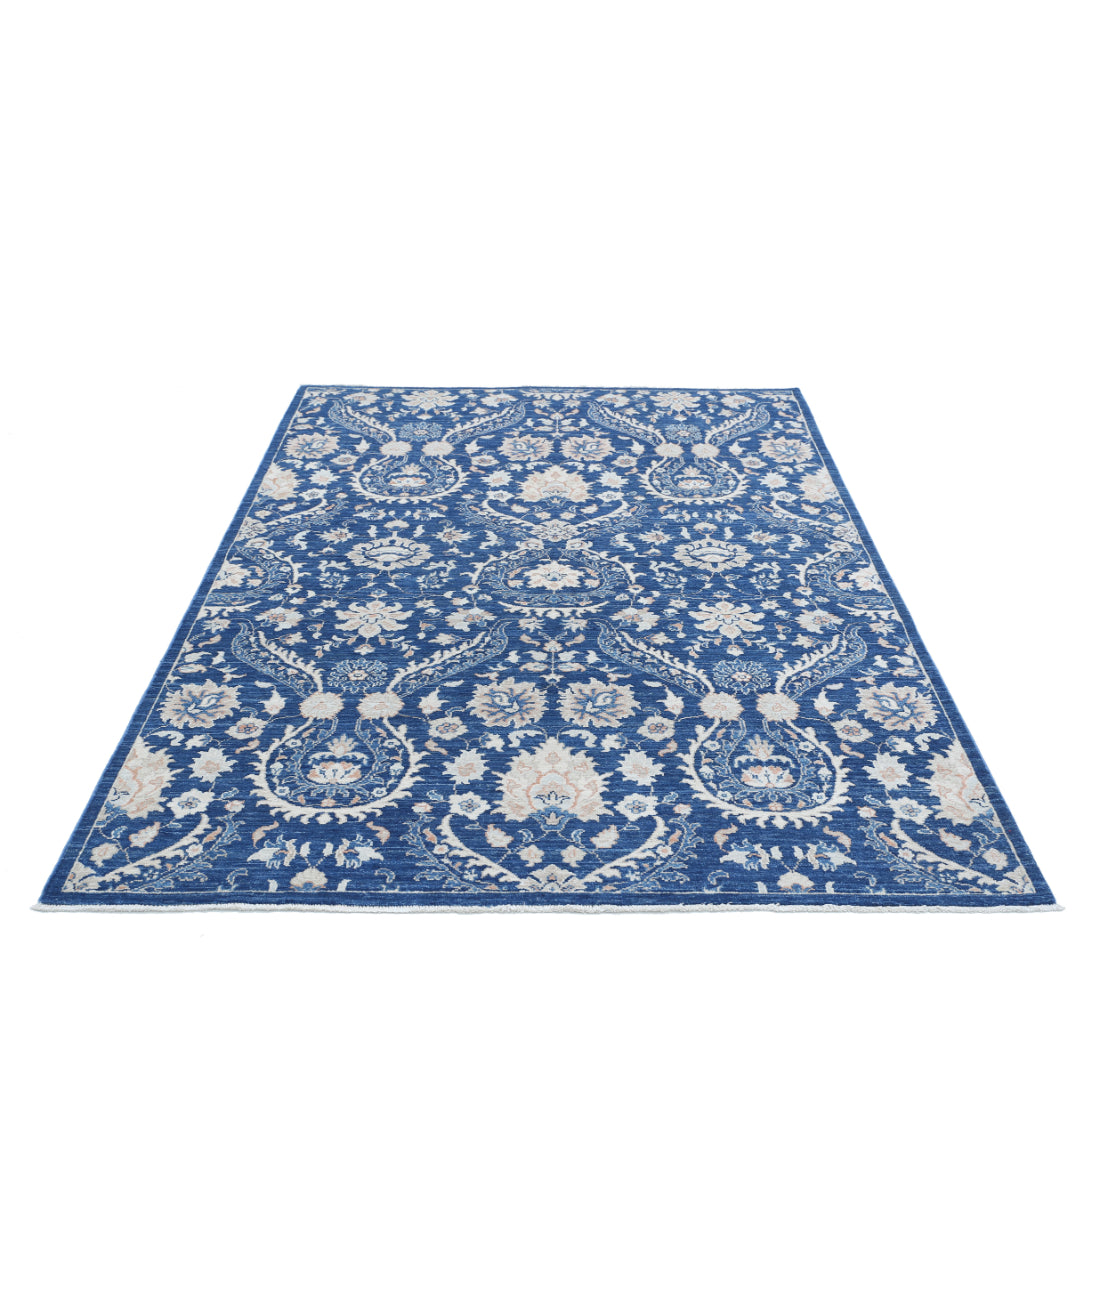 Hand Knotted Artemix Wool Rug - 5'7'' x 7'8'' 5'7'' x 7'8'' (168 X 230) / Blue / Ivory